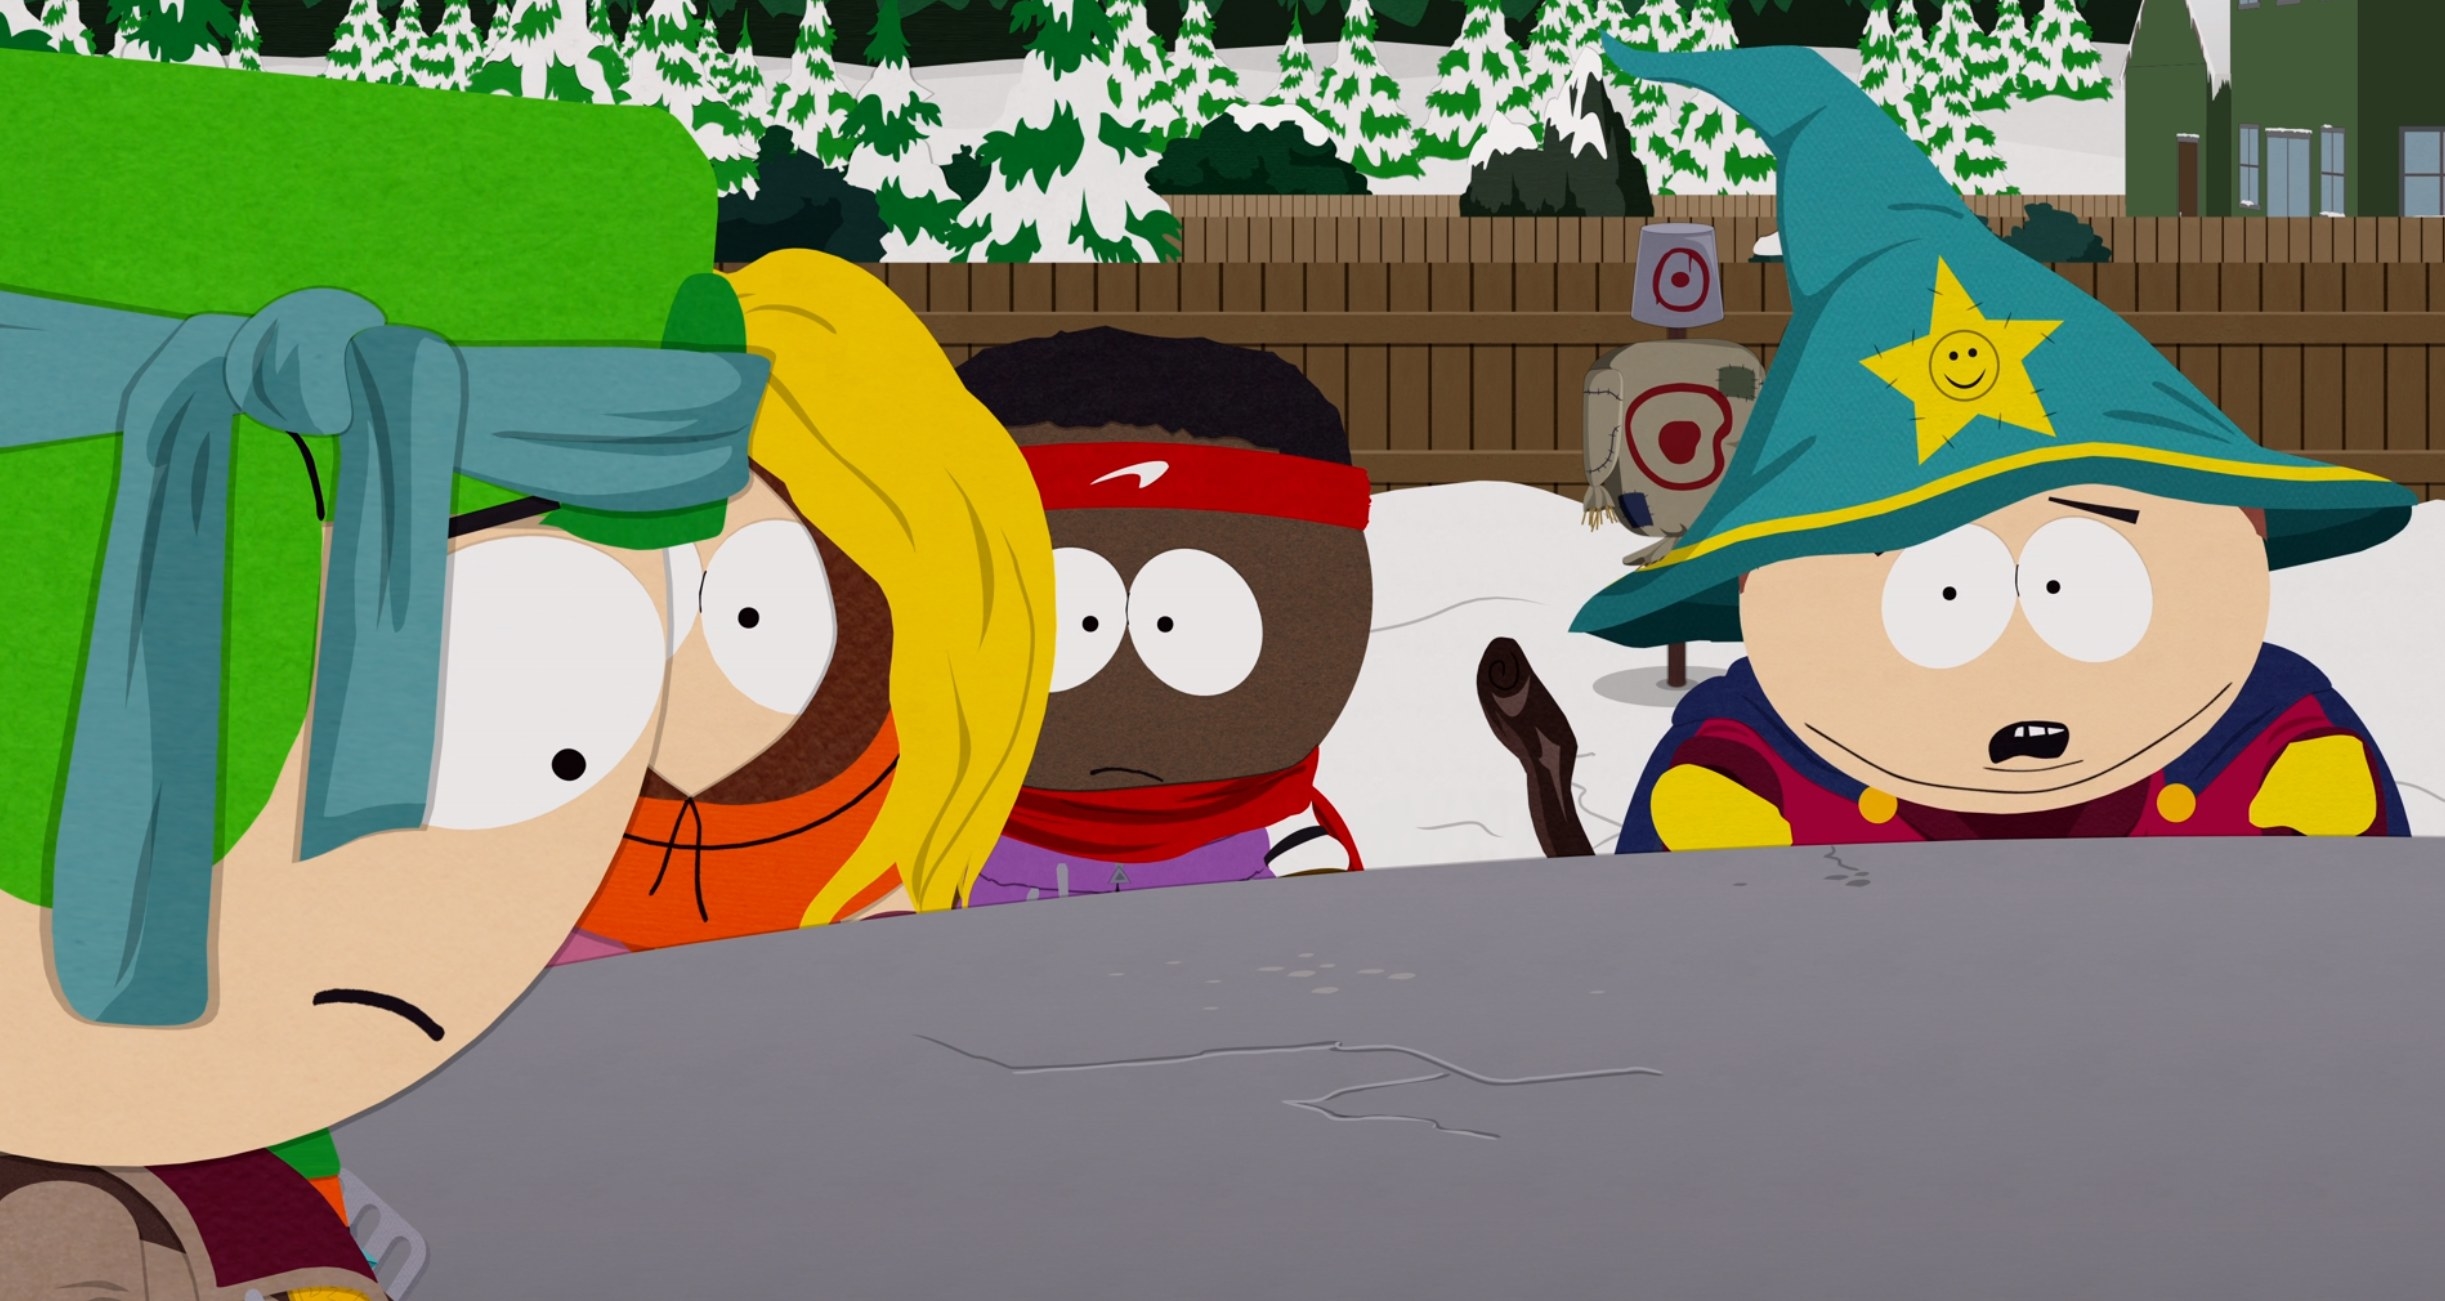 Wizard Cartman pleads with Kyle